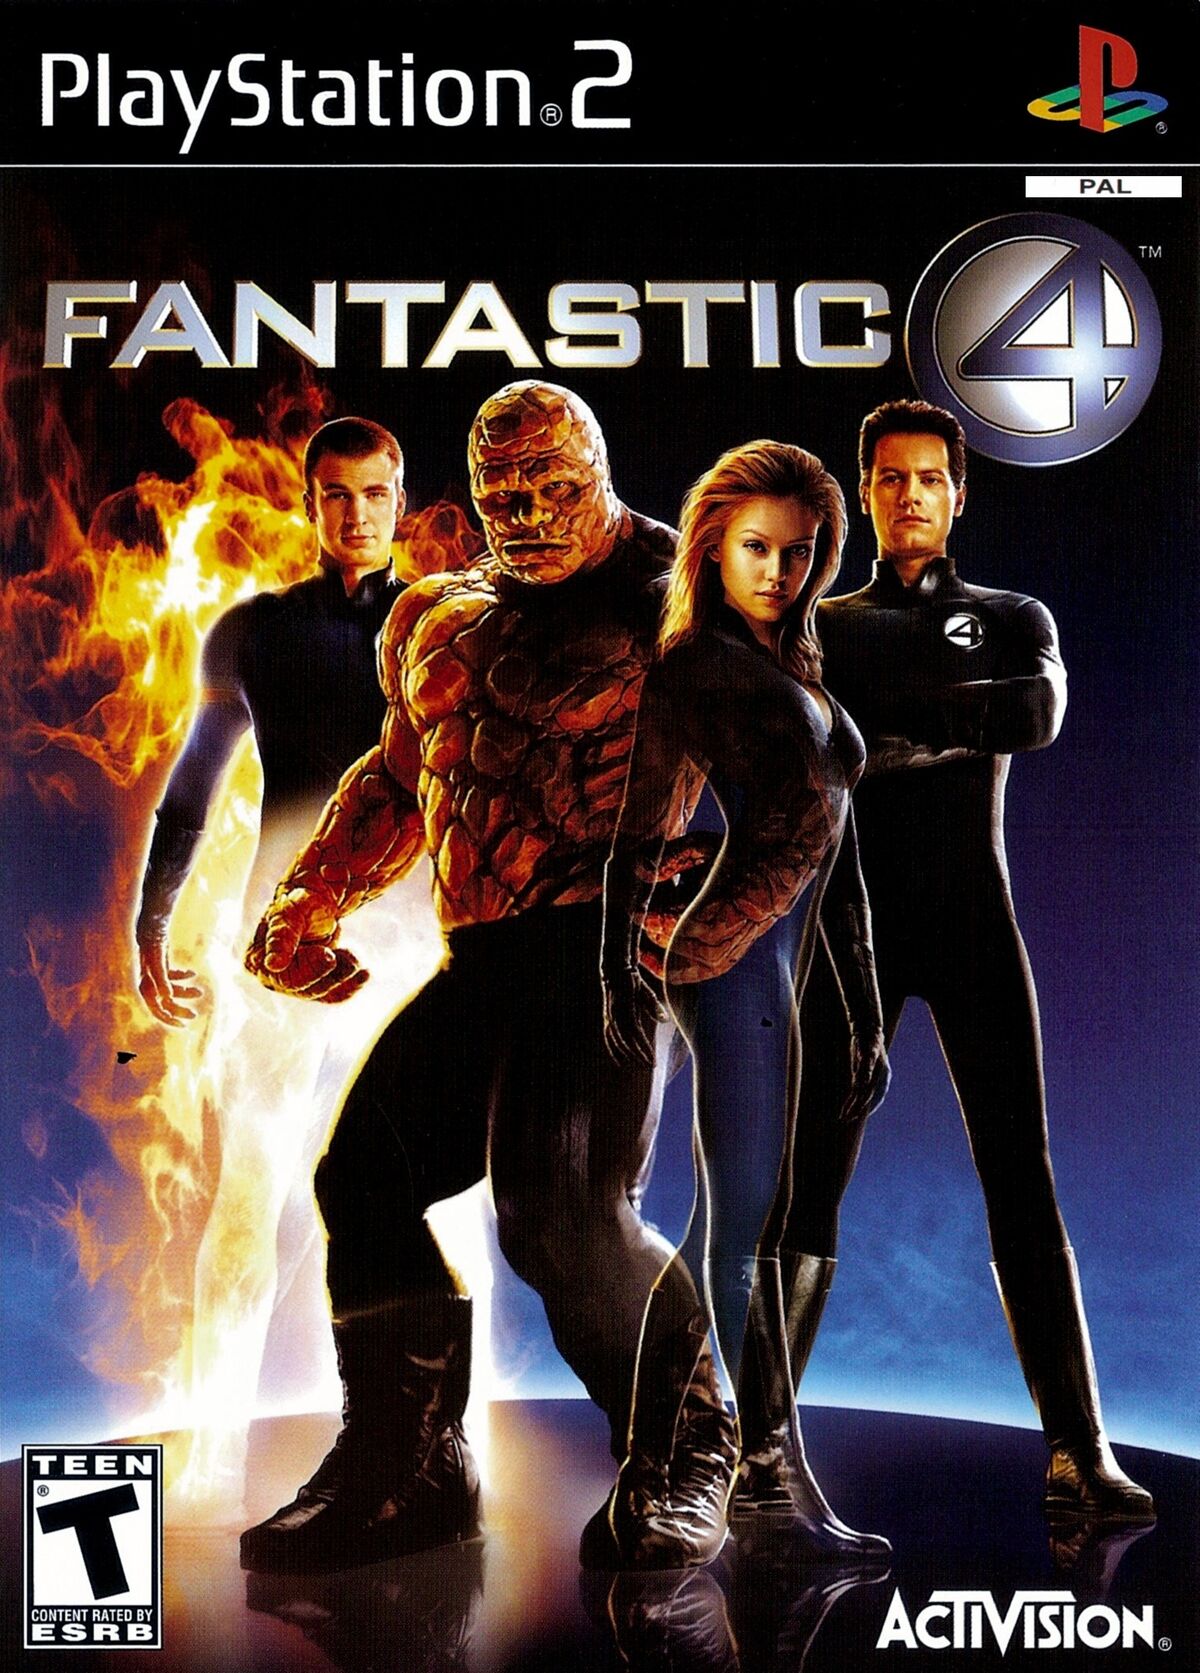 Fantastic Four (2005 Video Game), Fantastic Four Movies Wiki